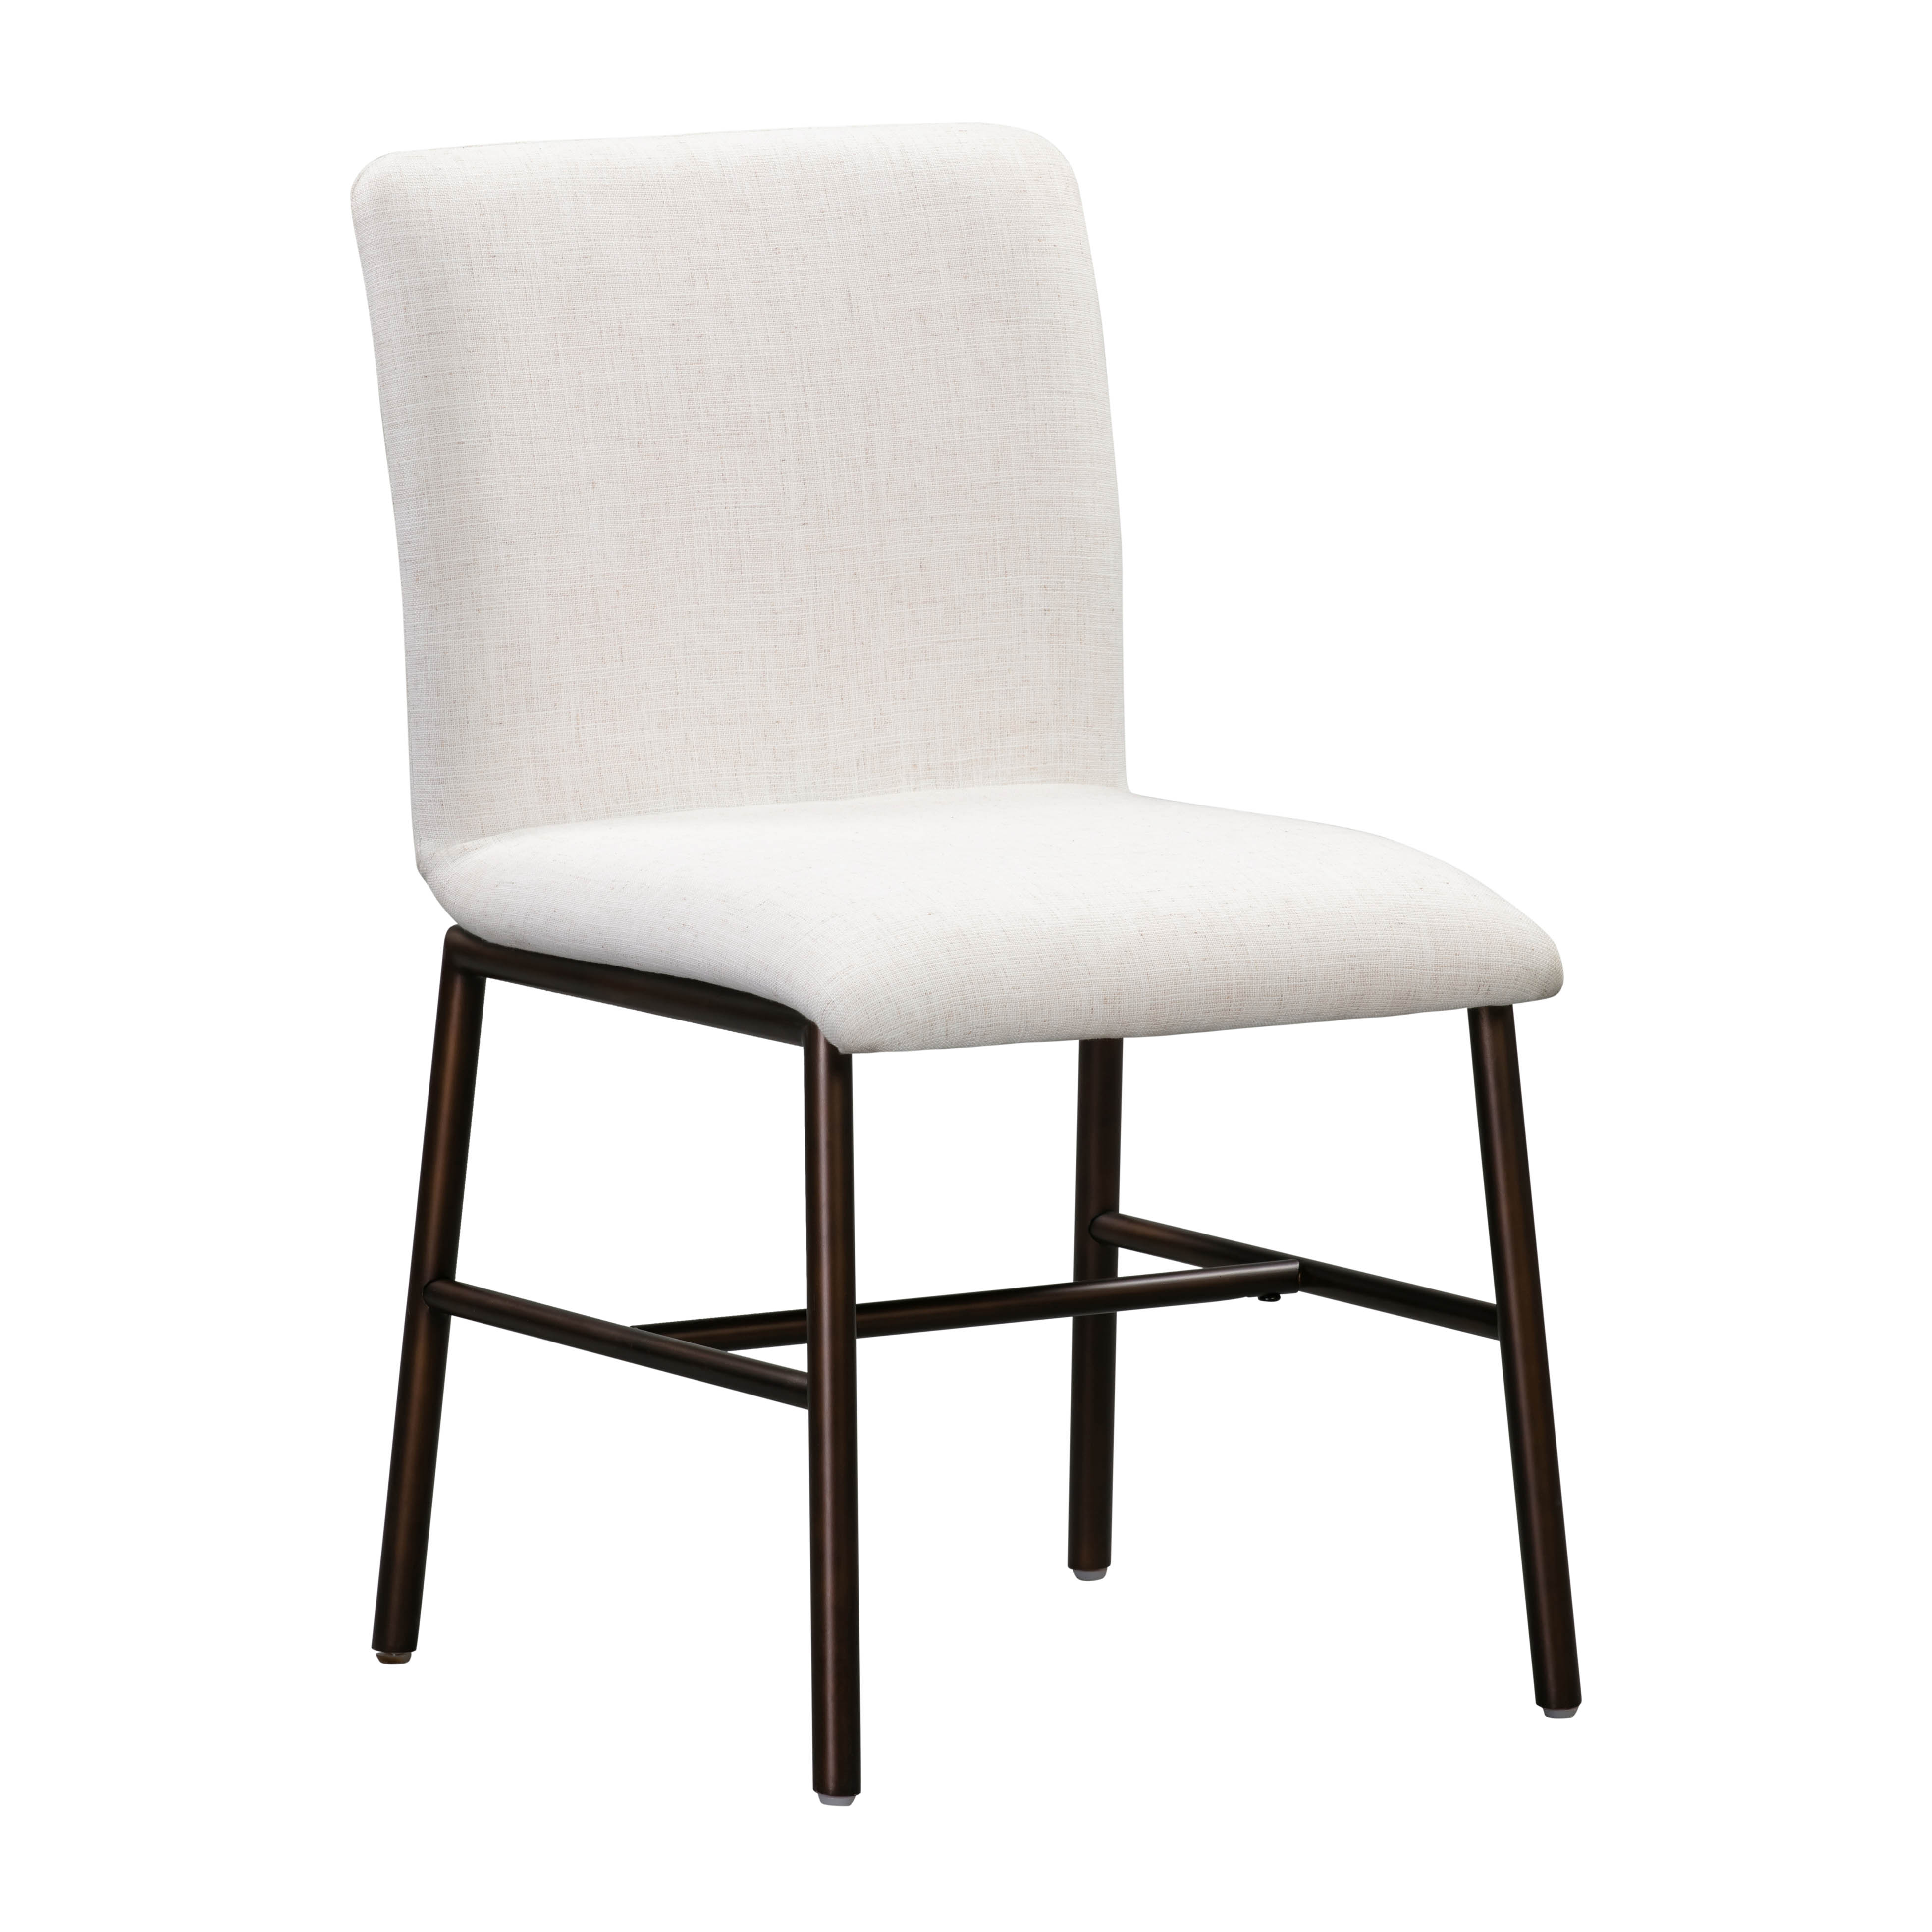 image of Bushwick Flax Upholstered Dining Chair (Set of 2) with sku:TOV-D44093